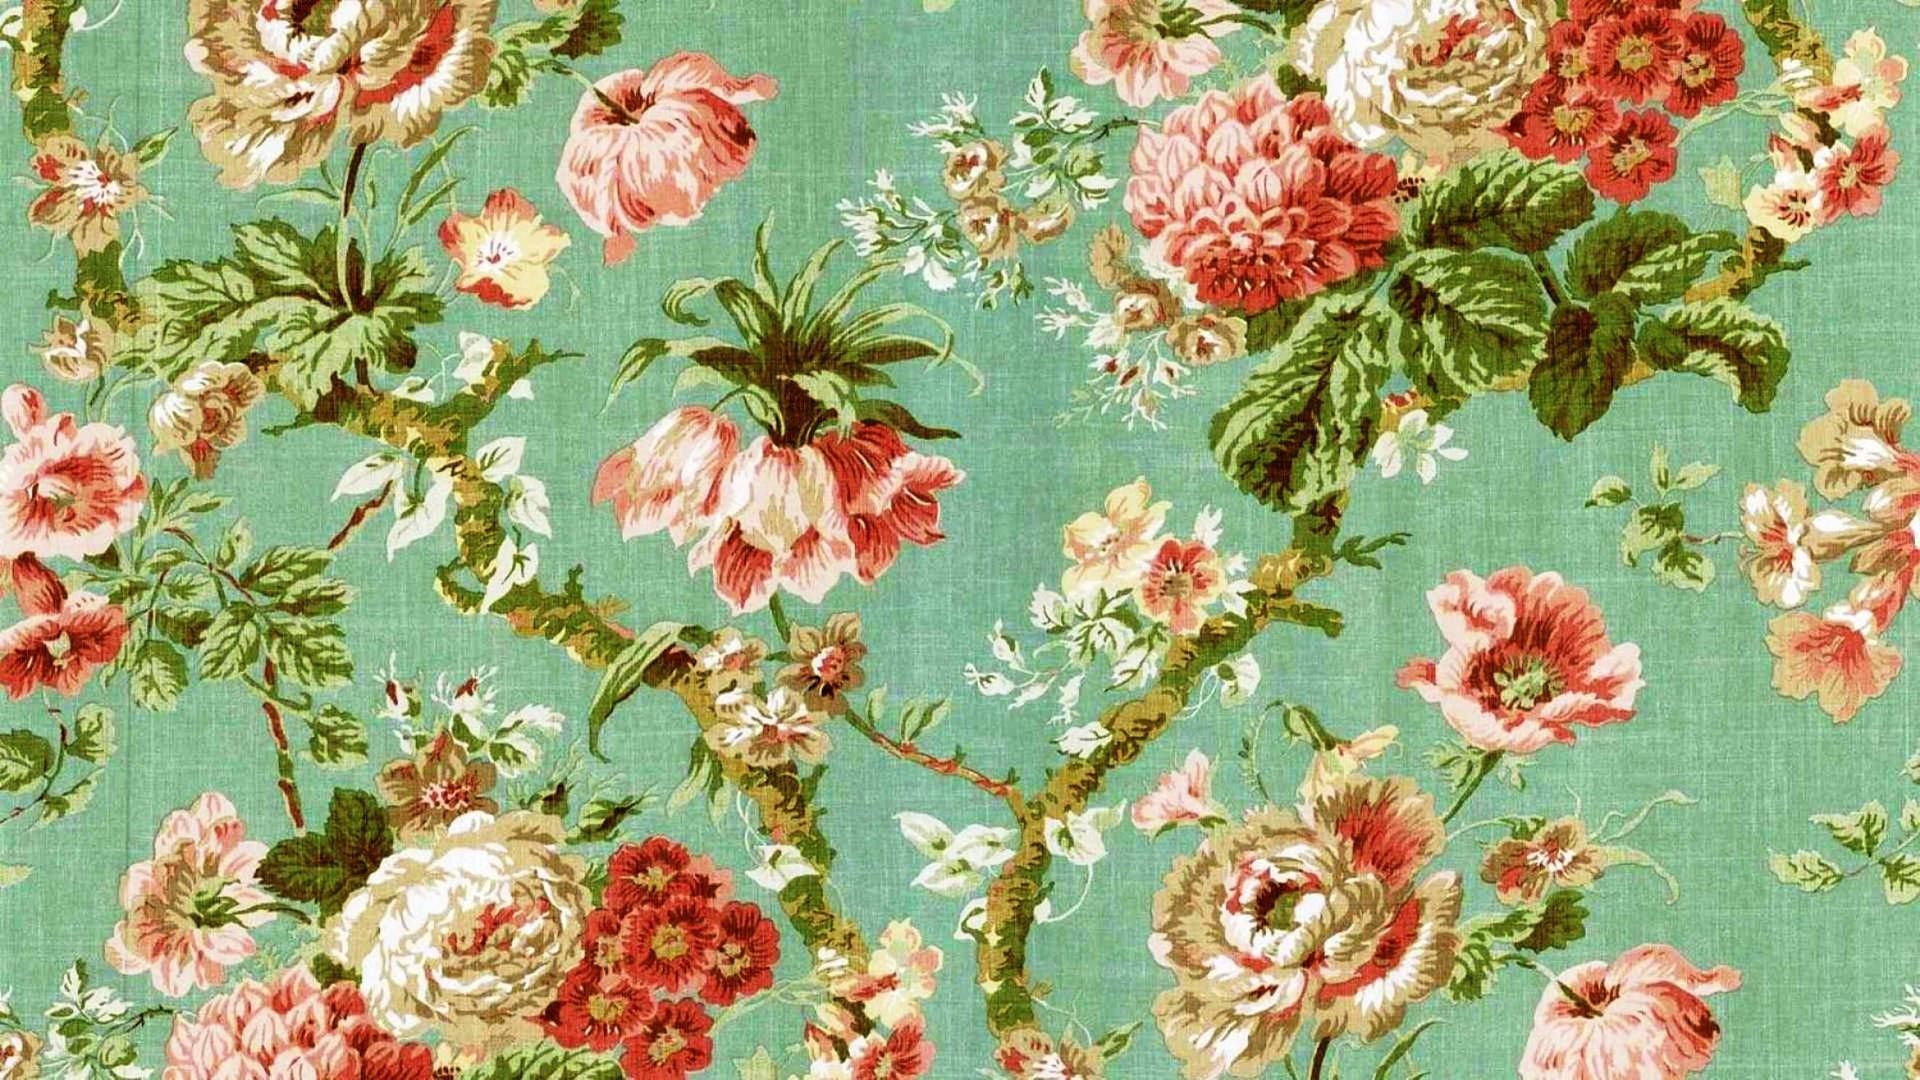 Green And Pink Floral Vintage Aesthetic Laptop Wallpaper